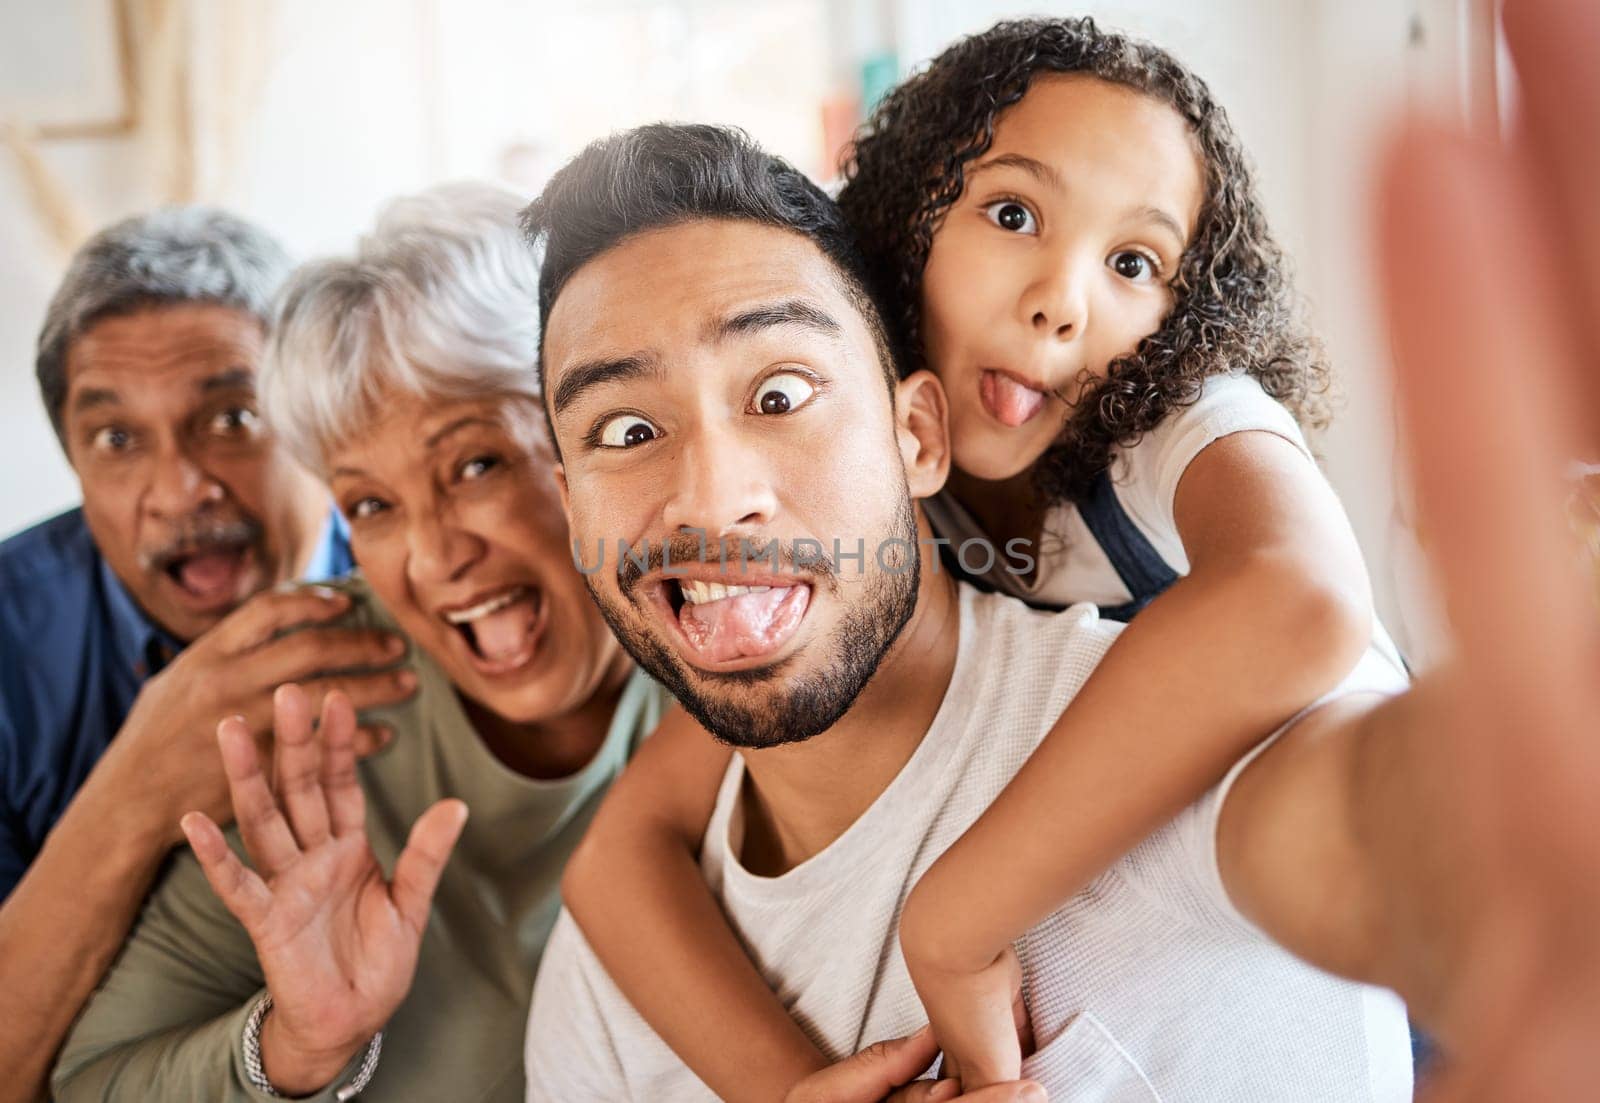 Happy family, portrait and silly face selfie for social media, vlog or funny online post at home. Grandparents, father and child with goofy expression for photo, memory or profile picture together by YuriArcurs